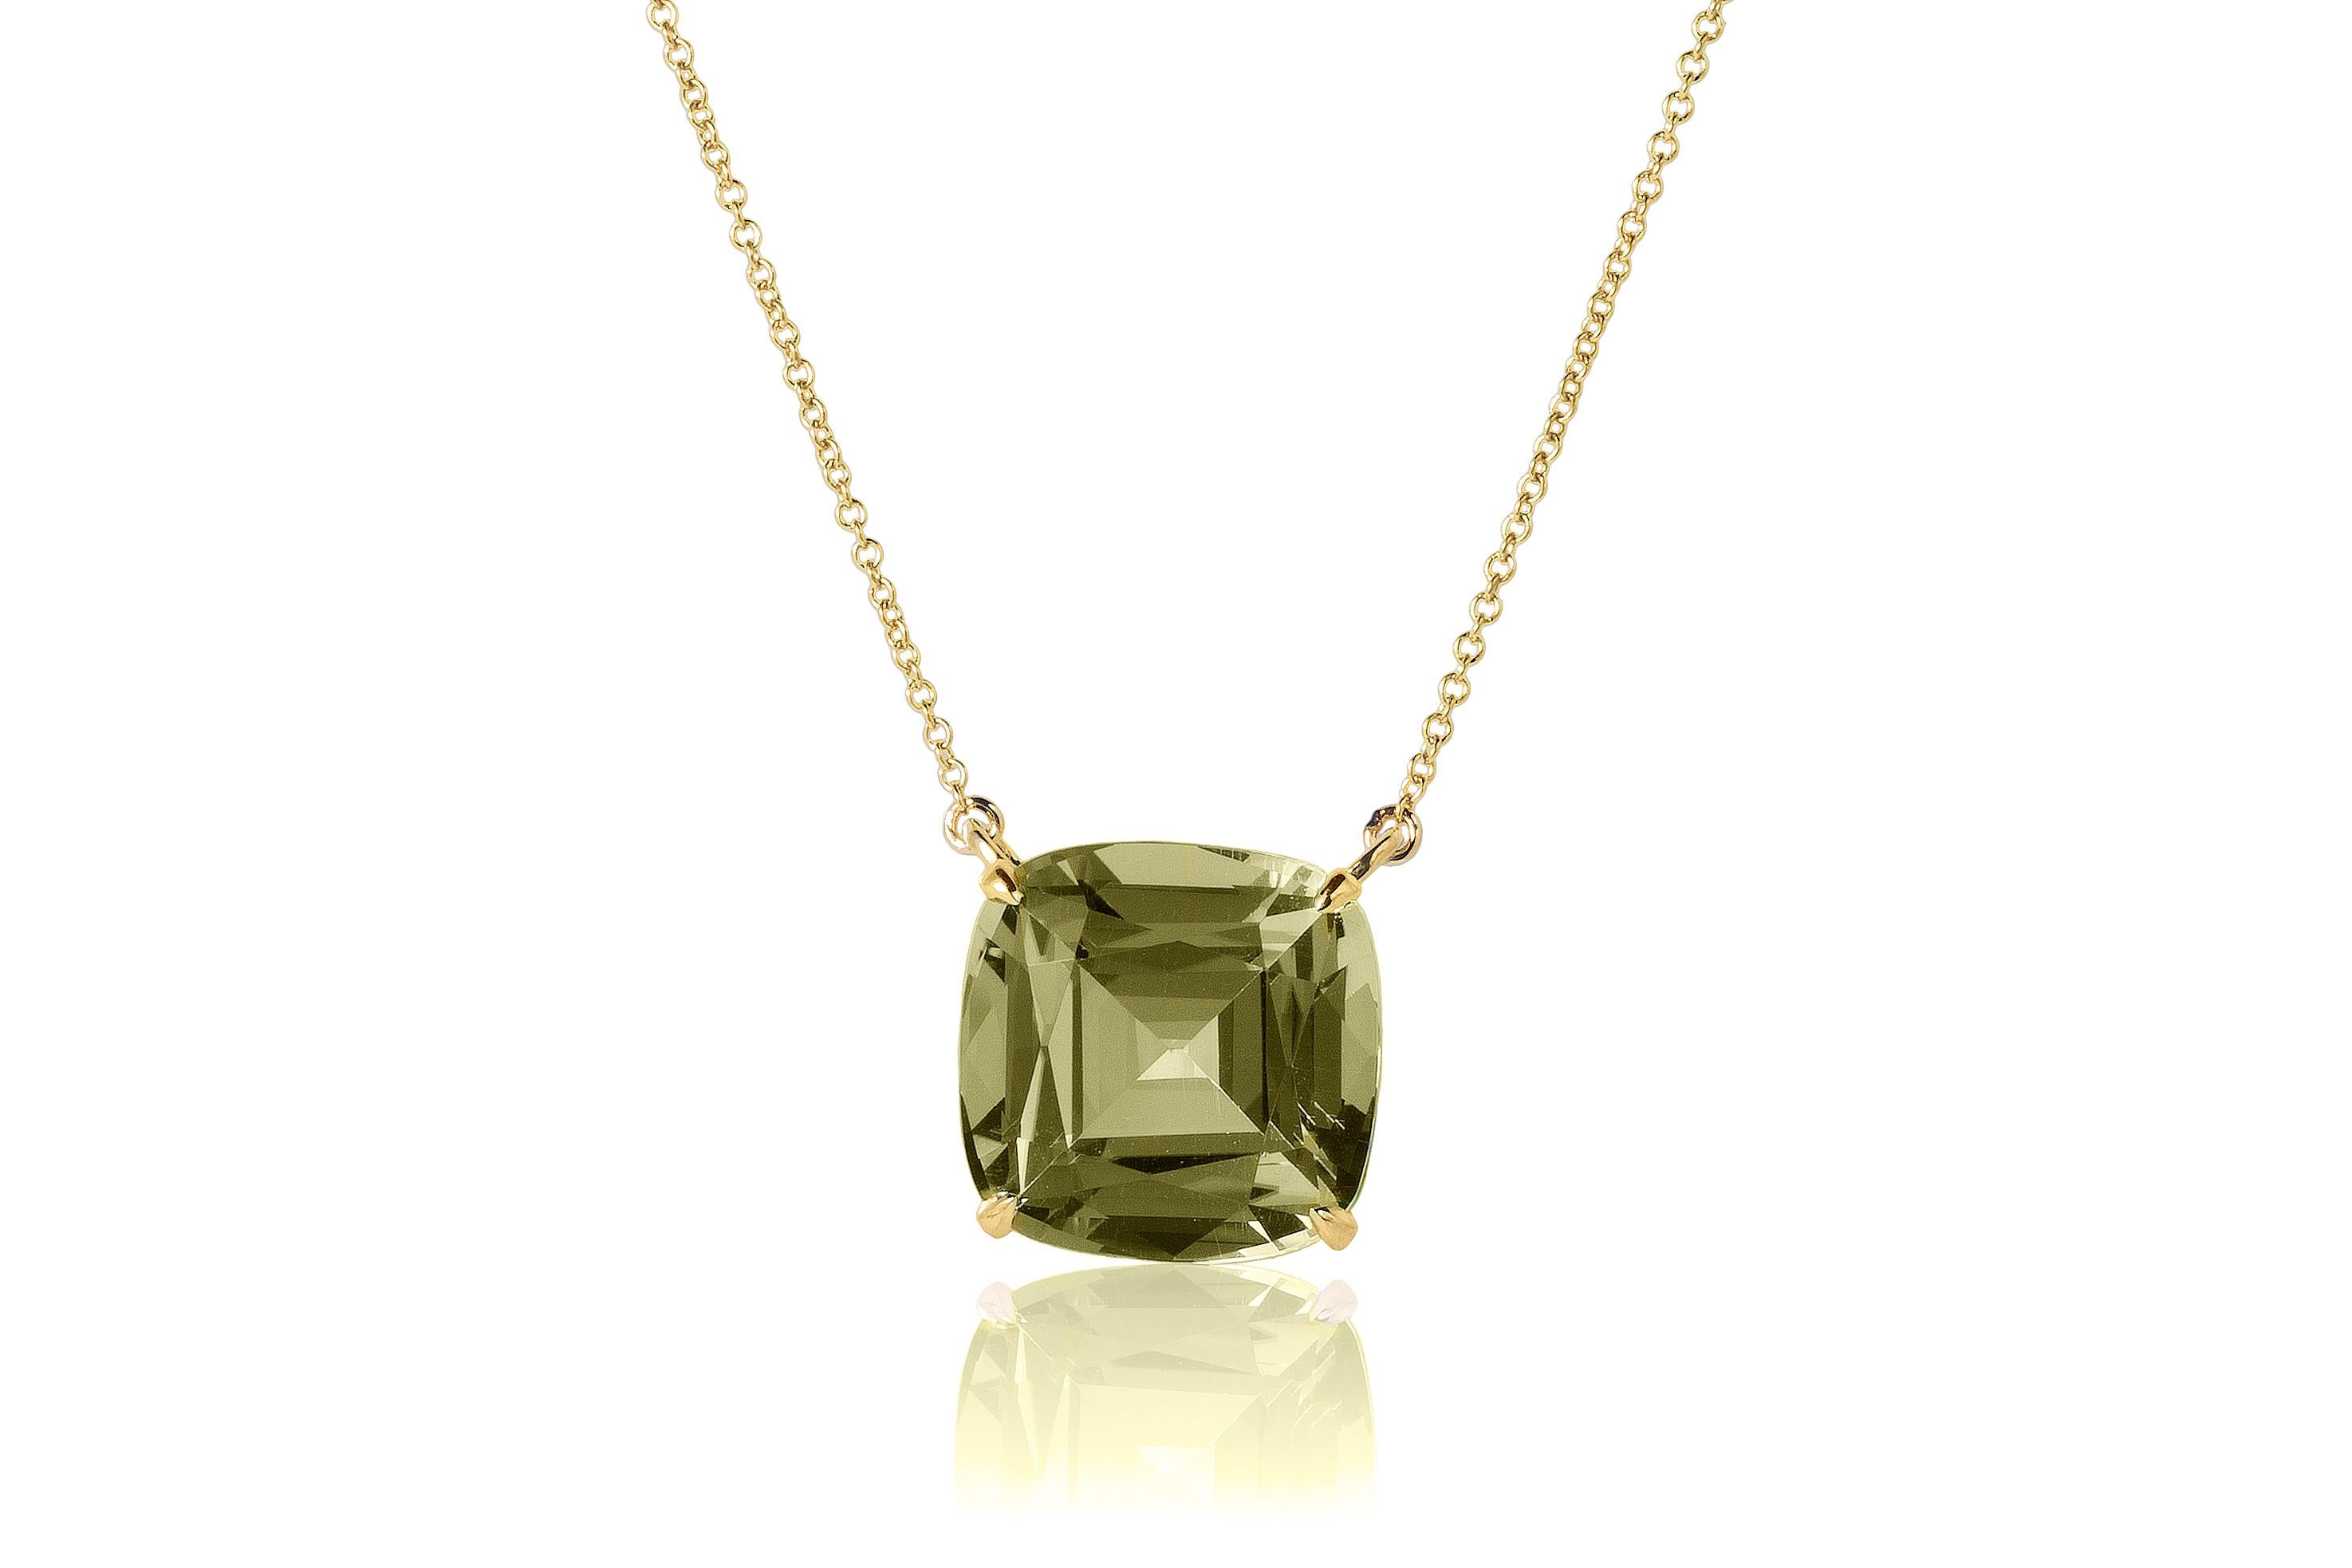 Prasiolite Cushion Pendant on Cable Chain in 18K Yellow Gold, from ‘Gossip' Collection 

Stone Size: 14 x 14 mm 

Gemstone Approx. Wt: Prasiolite- 11.14 Carats